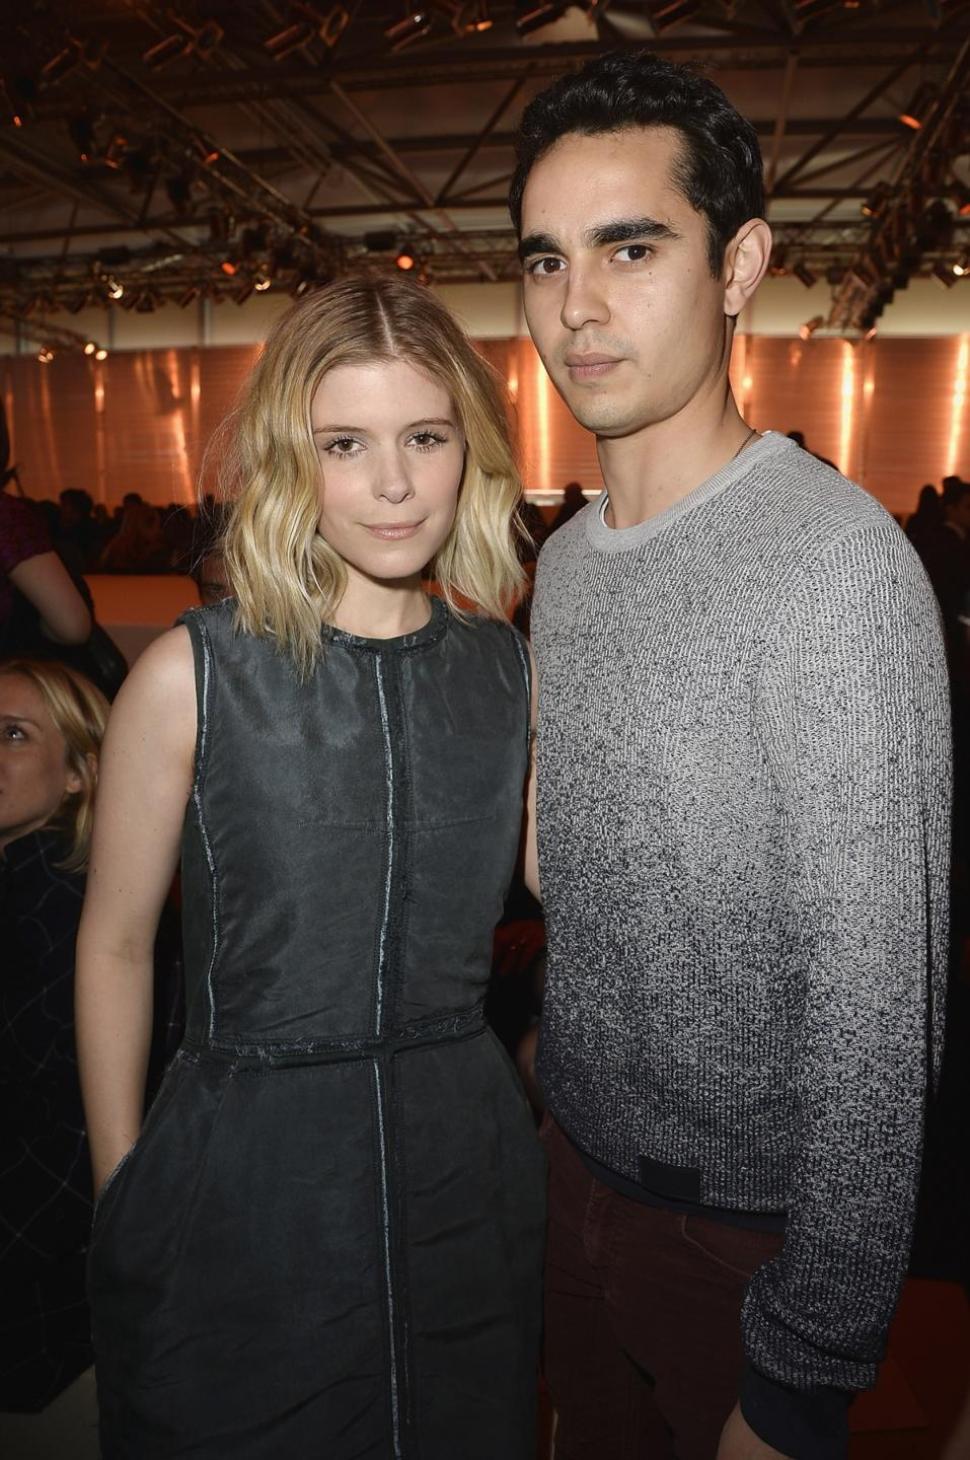 Kate Mara and boyfriend Max Minghella attend the Louis Vuitton show at Paris Fashion Week in March 2014. The two have reportedly called it quits after four years together.